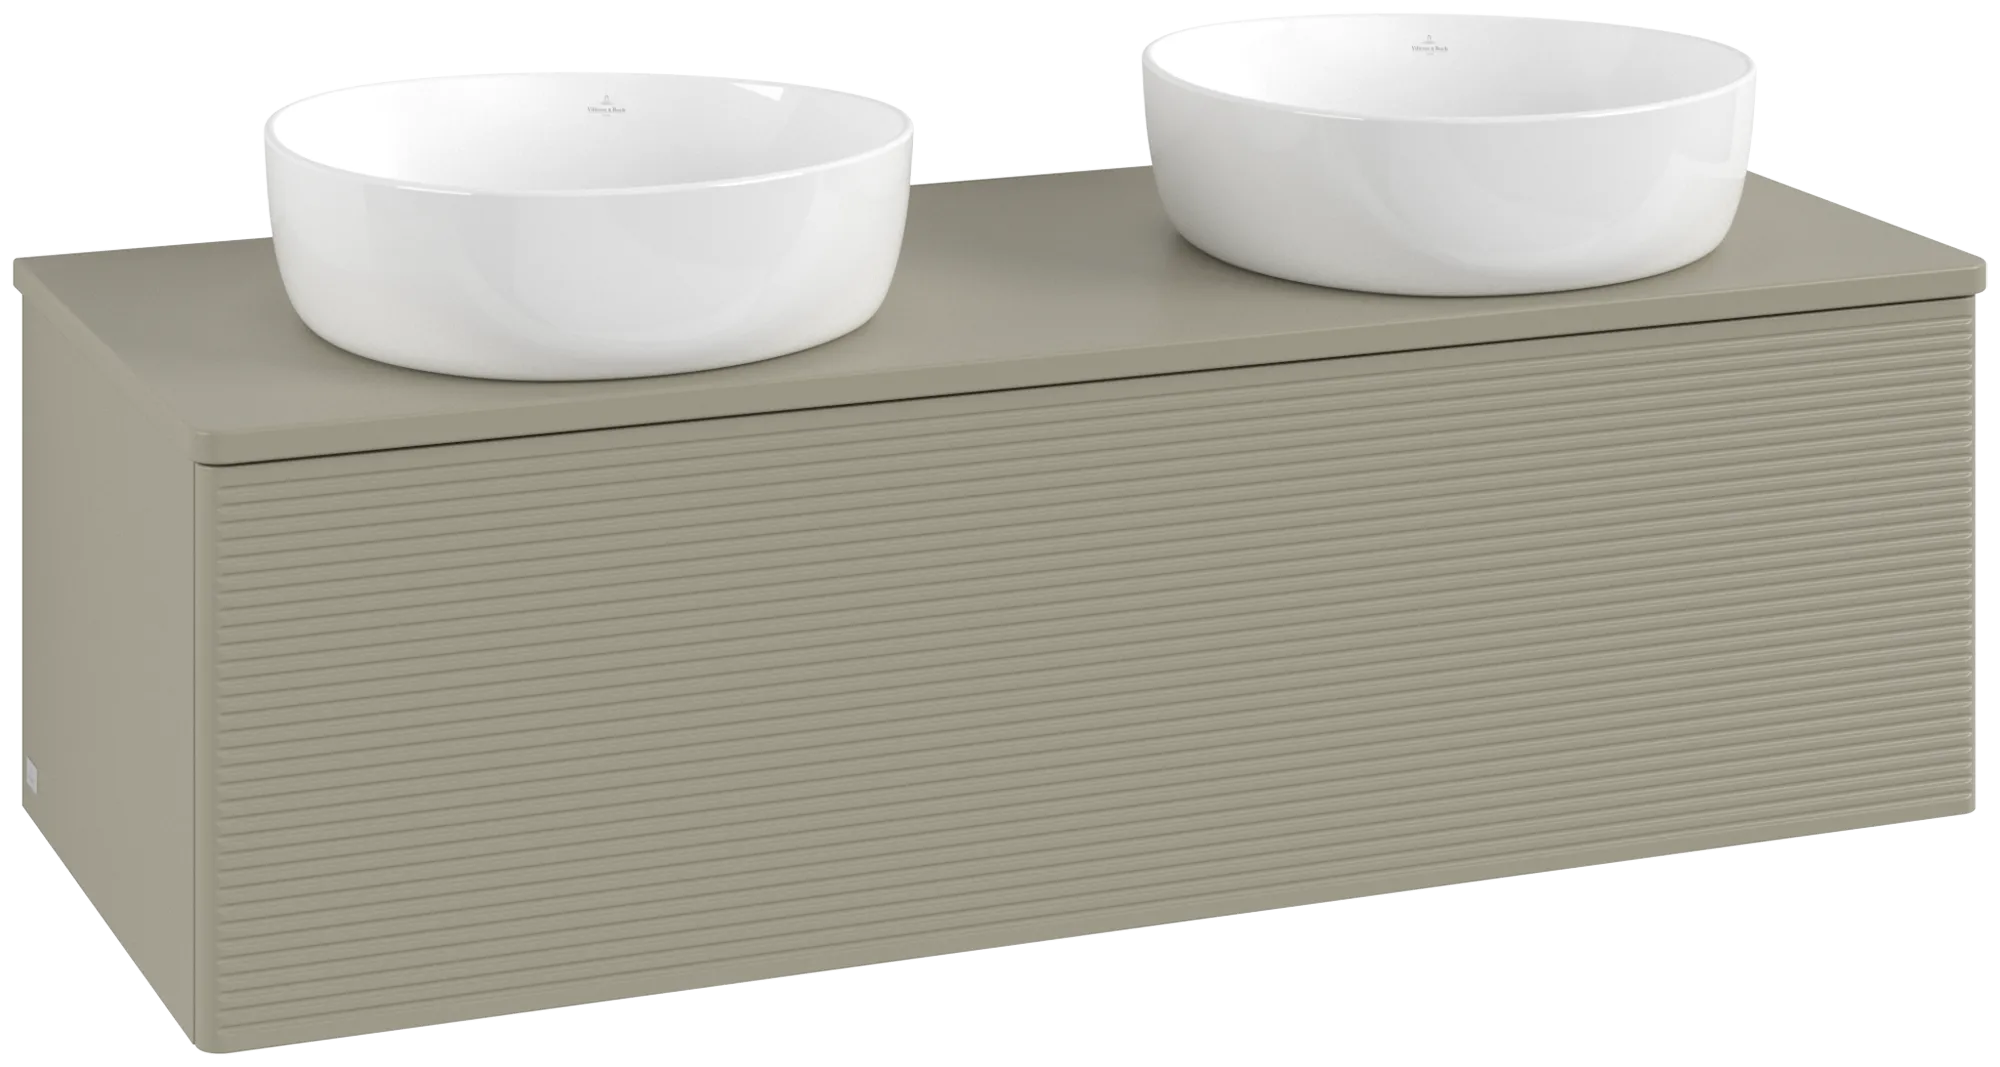 VILLEROY BOCH Antao Vanity unit, with lighting, 1 pull-out compartment, 1200 x 360 x 500 mm, Front with grain texture, Stone Grey Matt Lacquer / Stone Grey Matt Lacquer #L35110HK resmi